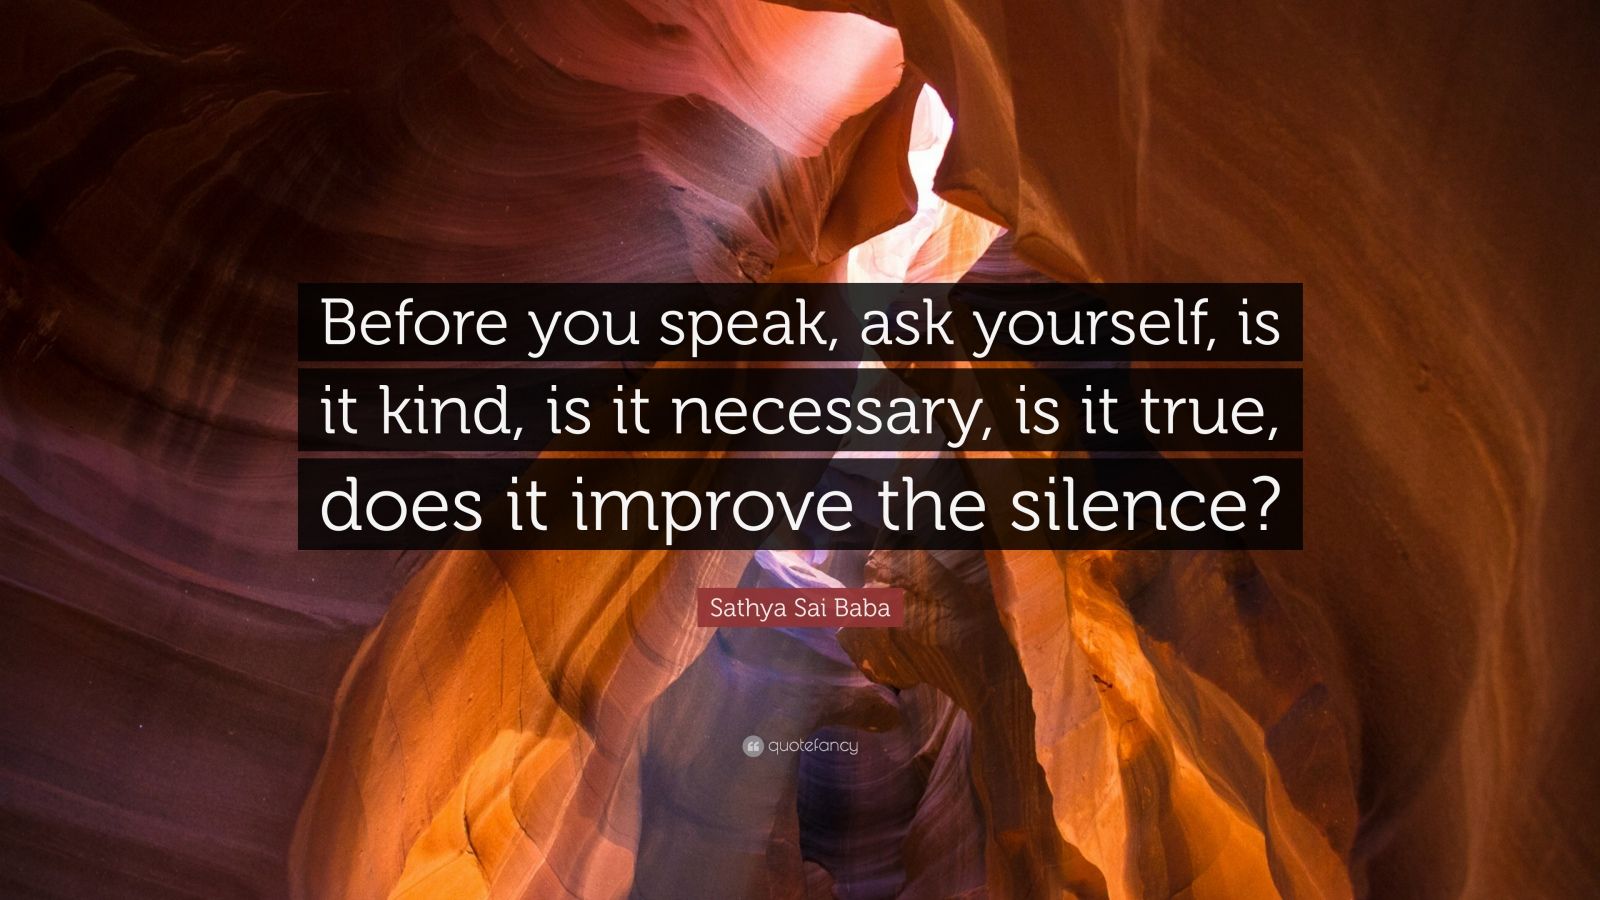 Sathya Sai Baba Quote: "Before you speak, ask yourself, is ...